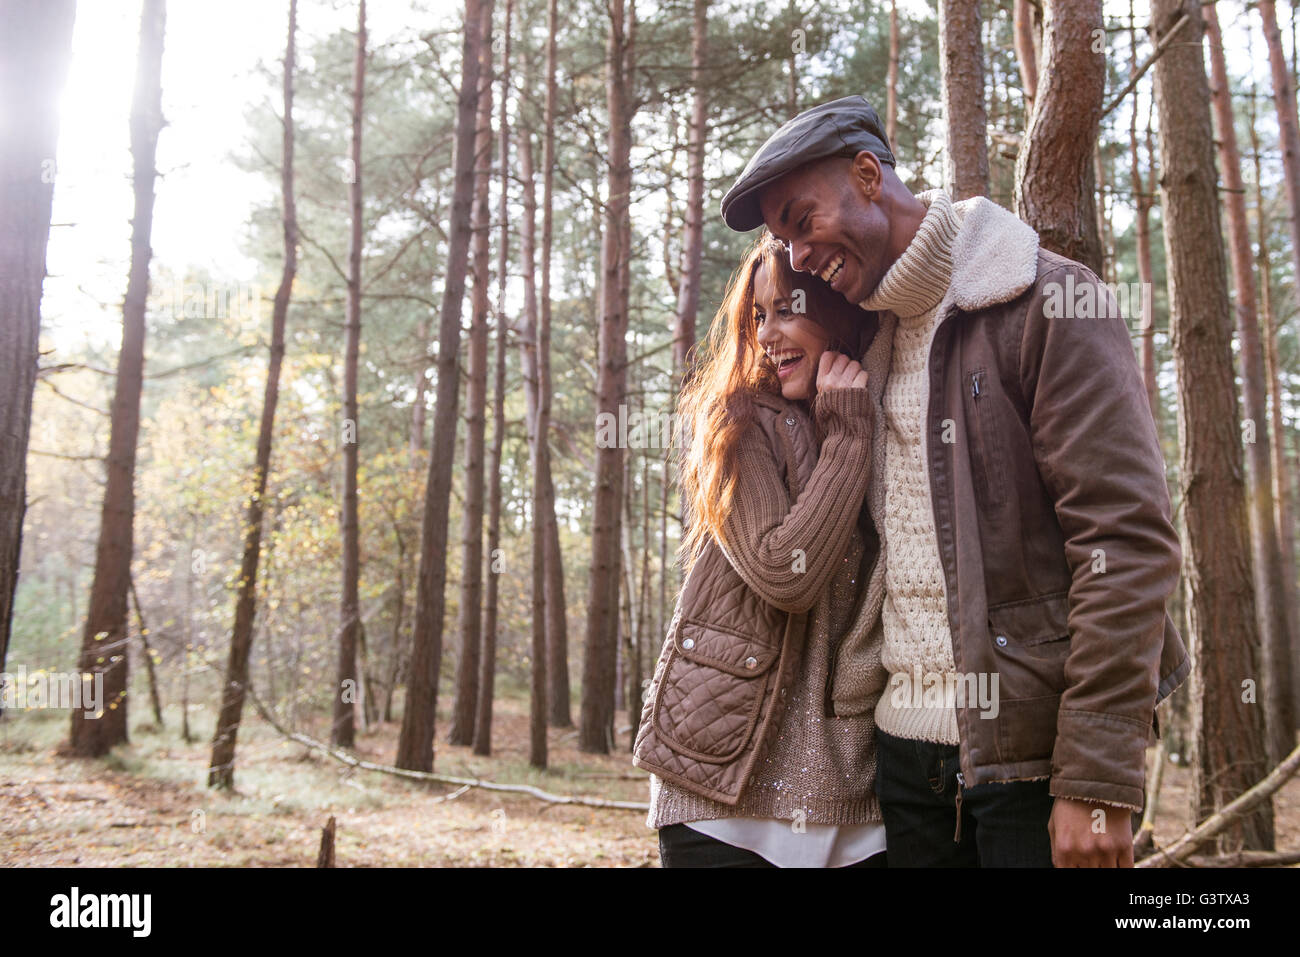 A young couple cuddling on a forest walk in Autumn. Stock Photo